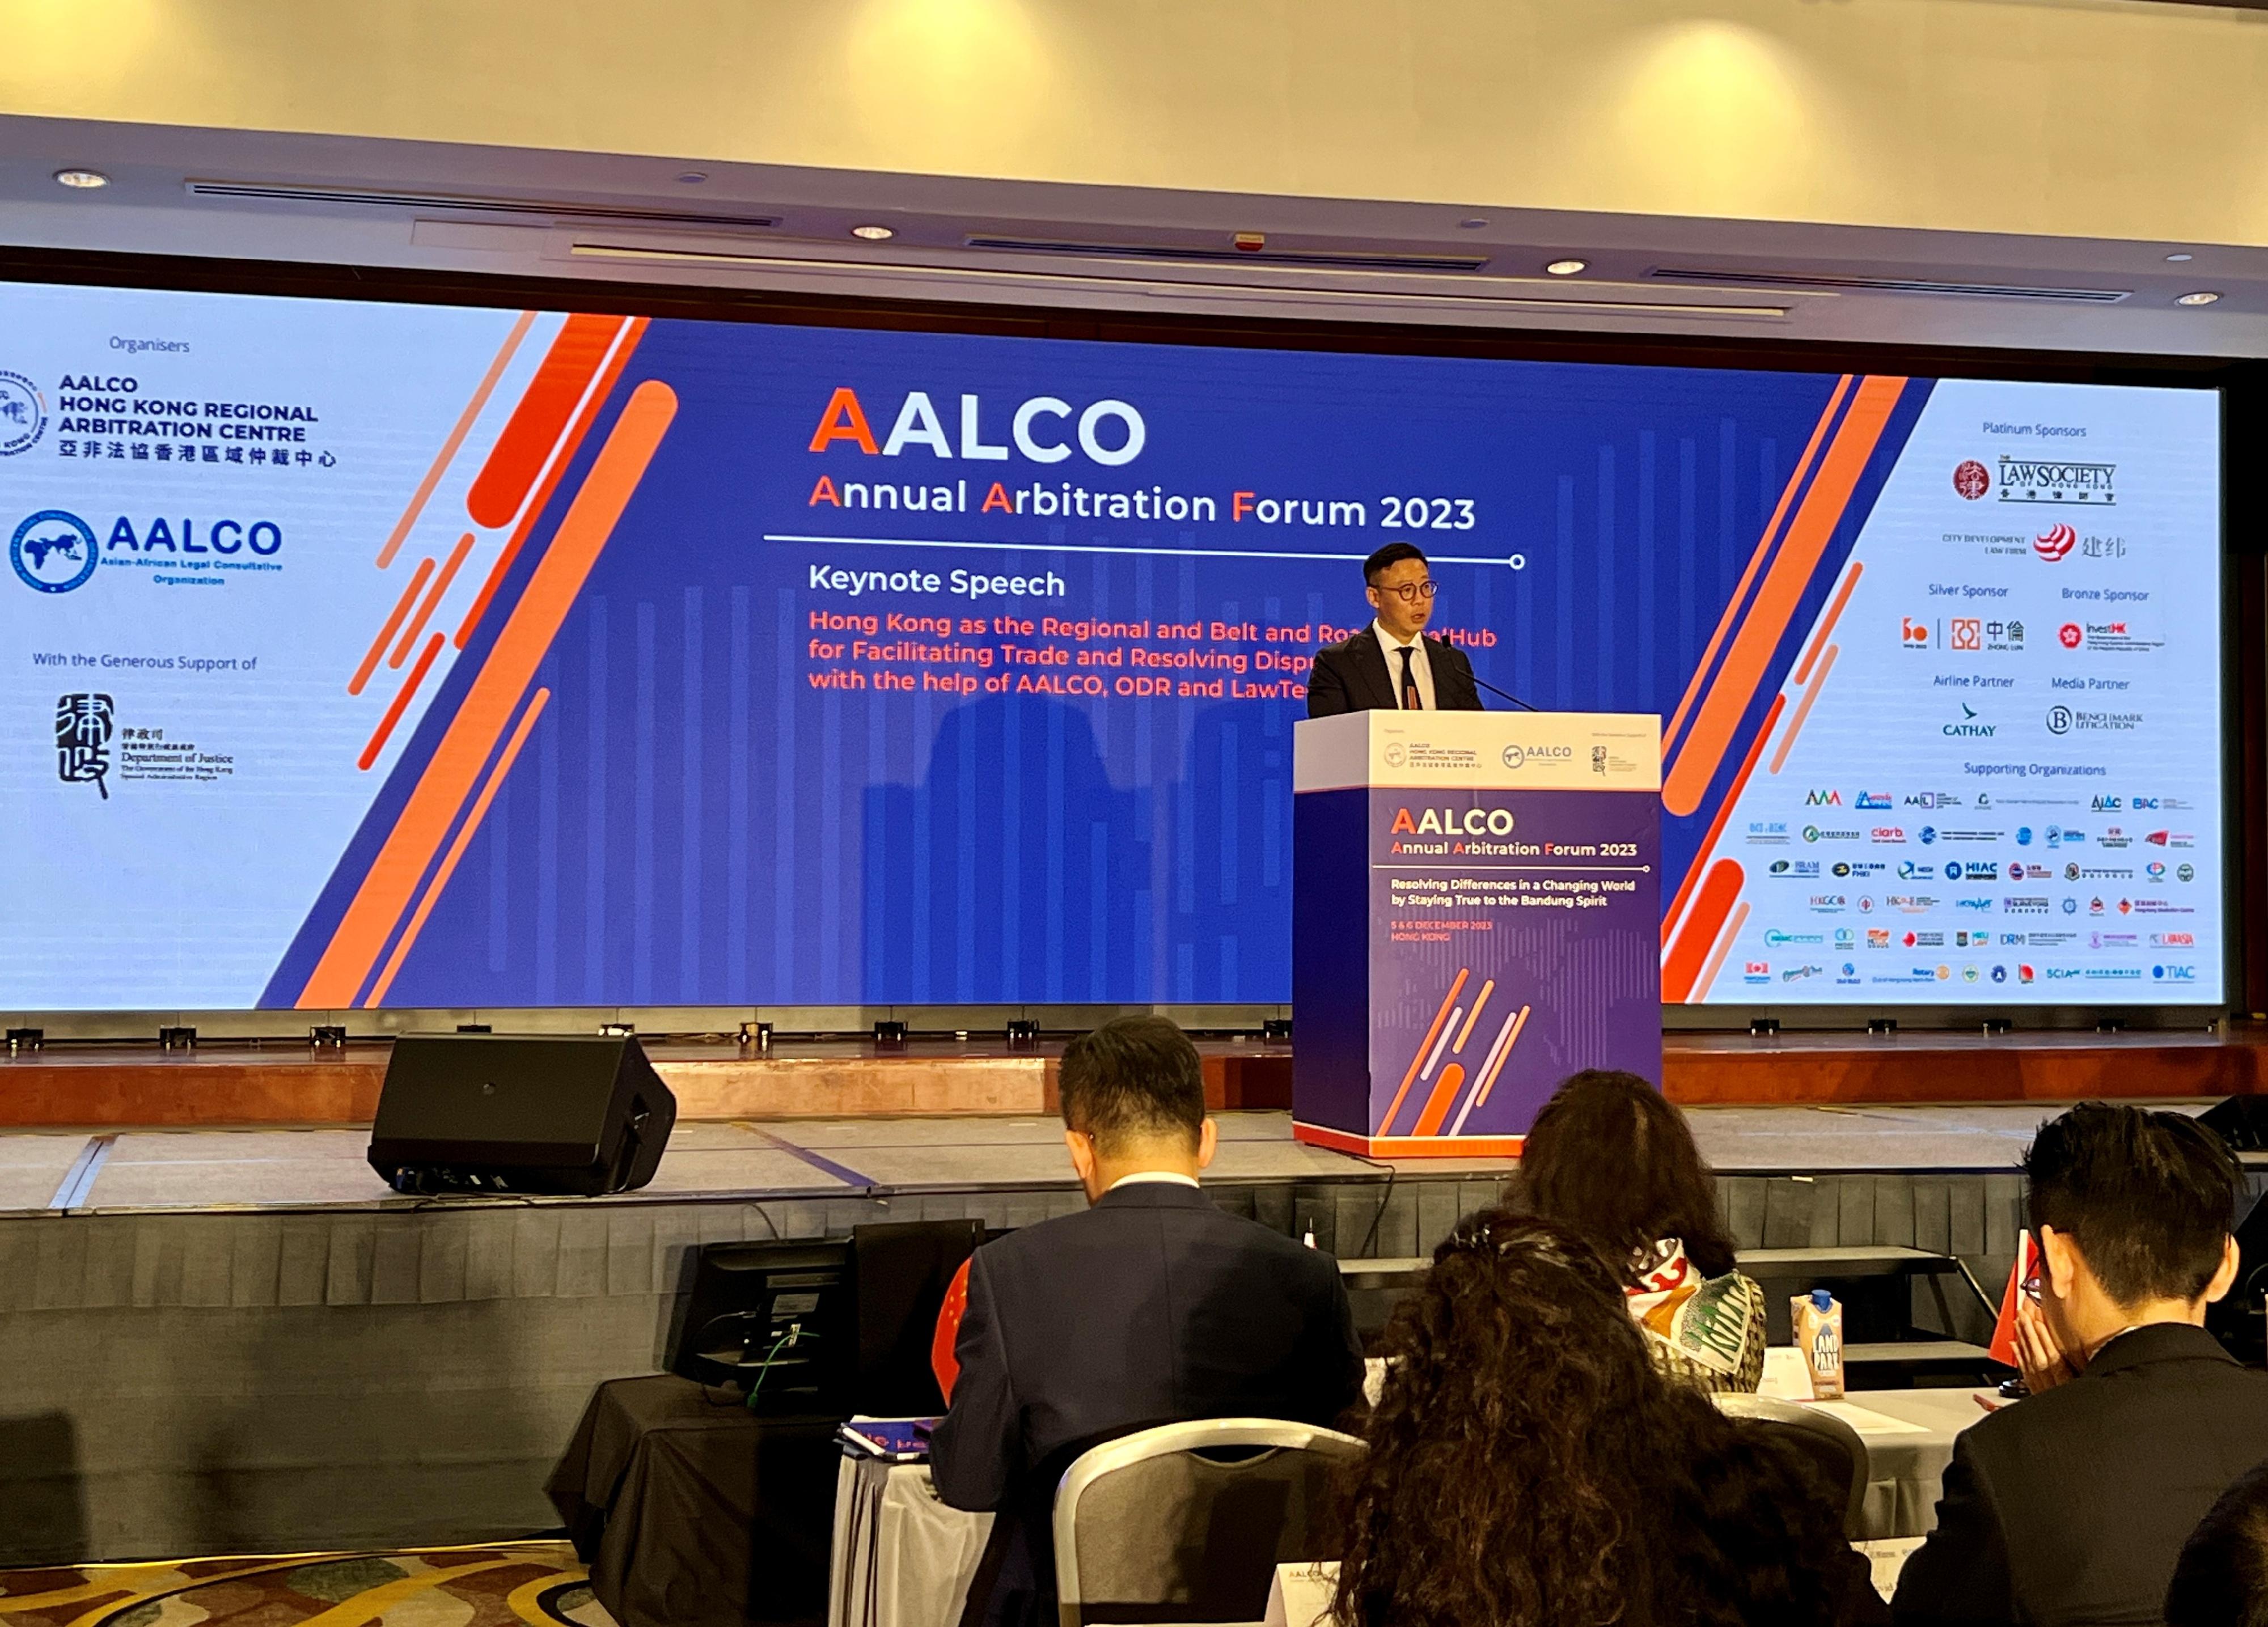 The Acting Secretary for Justice, Mr Cheung Kwok-kwan, speaks at the AALCO Annual Arbitration Forum 2023 today (December 5).
